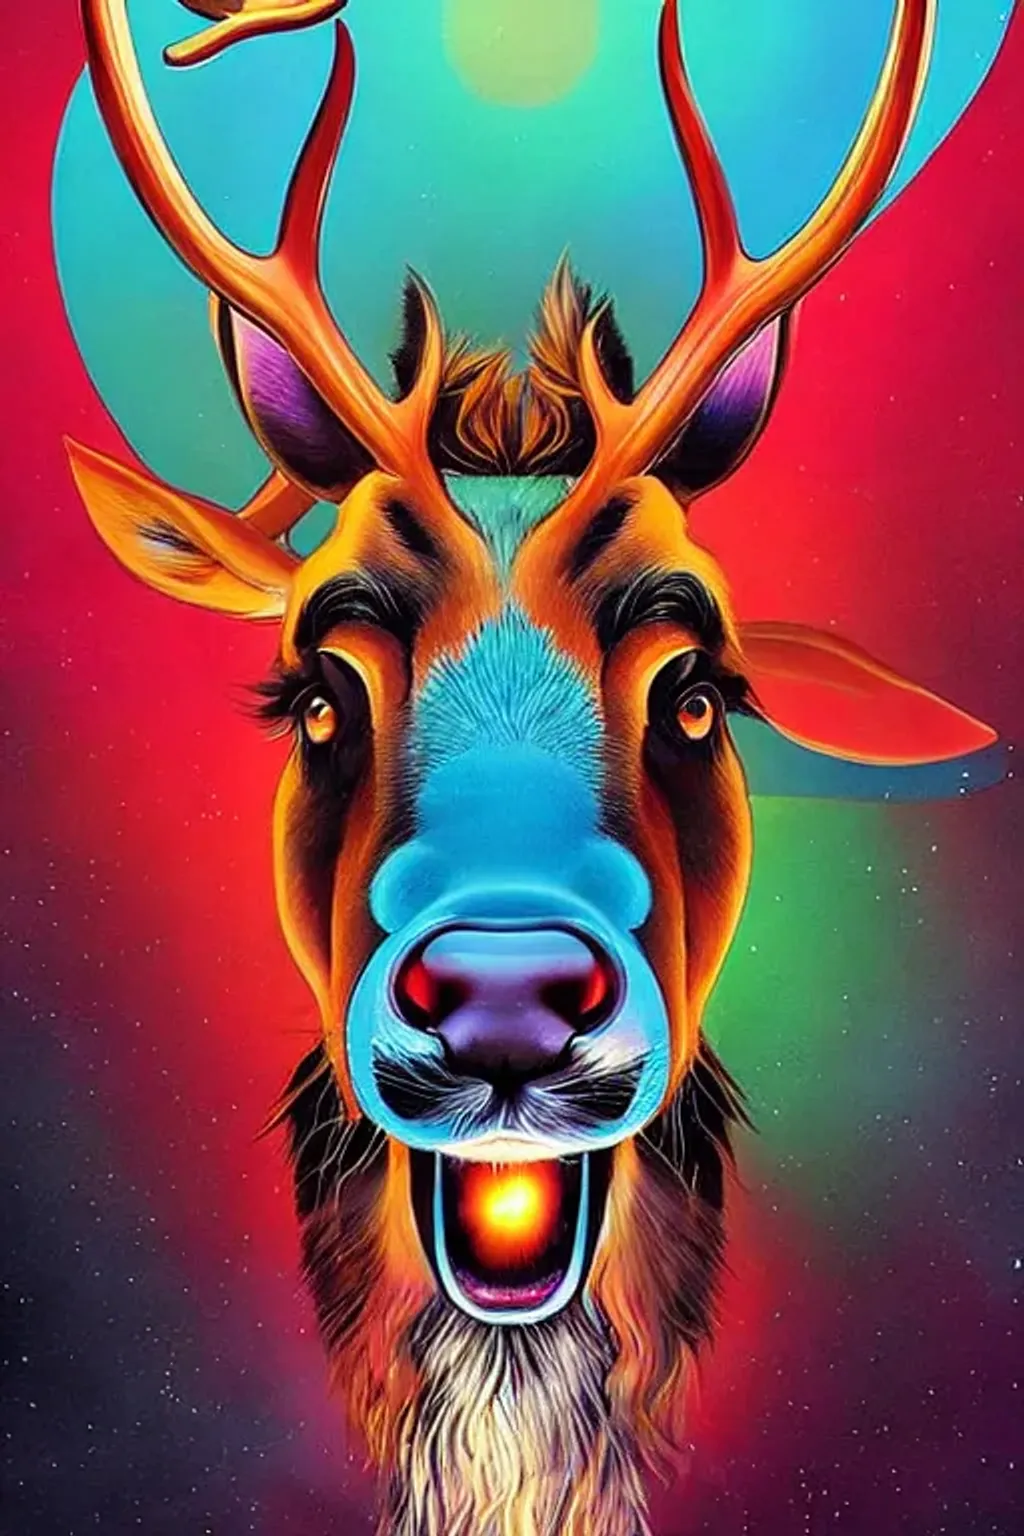 Prompt: Reindeer caricature by Tiago Hoisel and Moebius, perfect facial features, vivid color, cinematic, epic